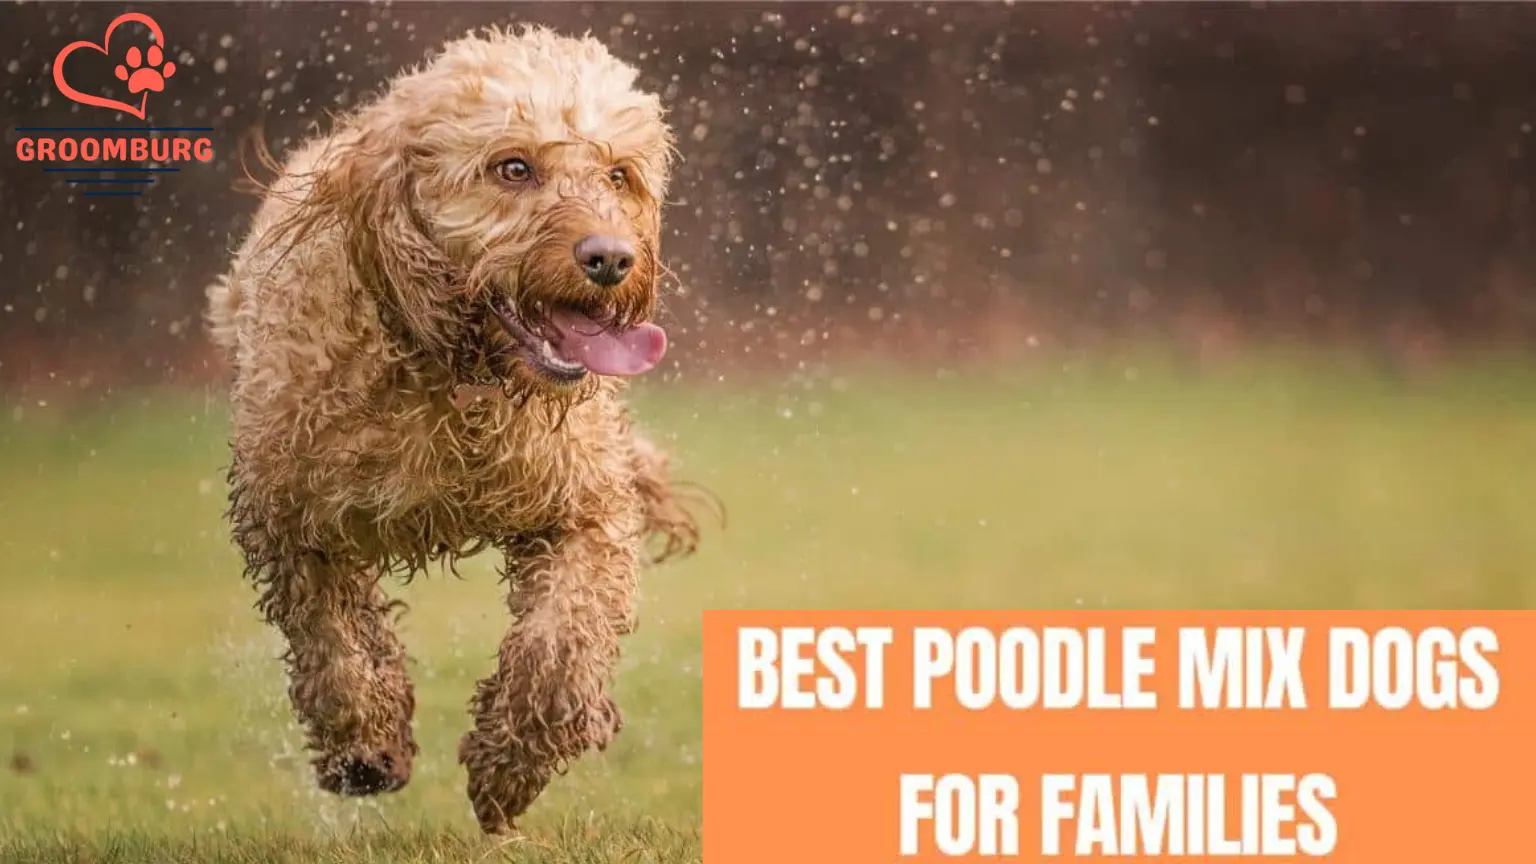 7 Different Types of Poodles Mixes – An Ultimate Guide to Choose the Right Option